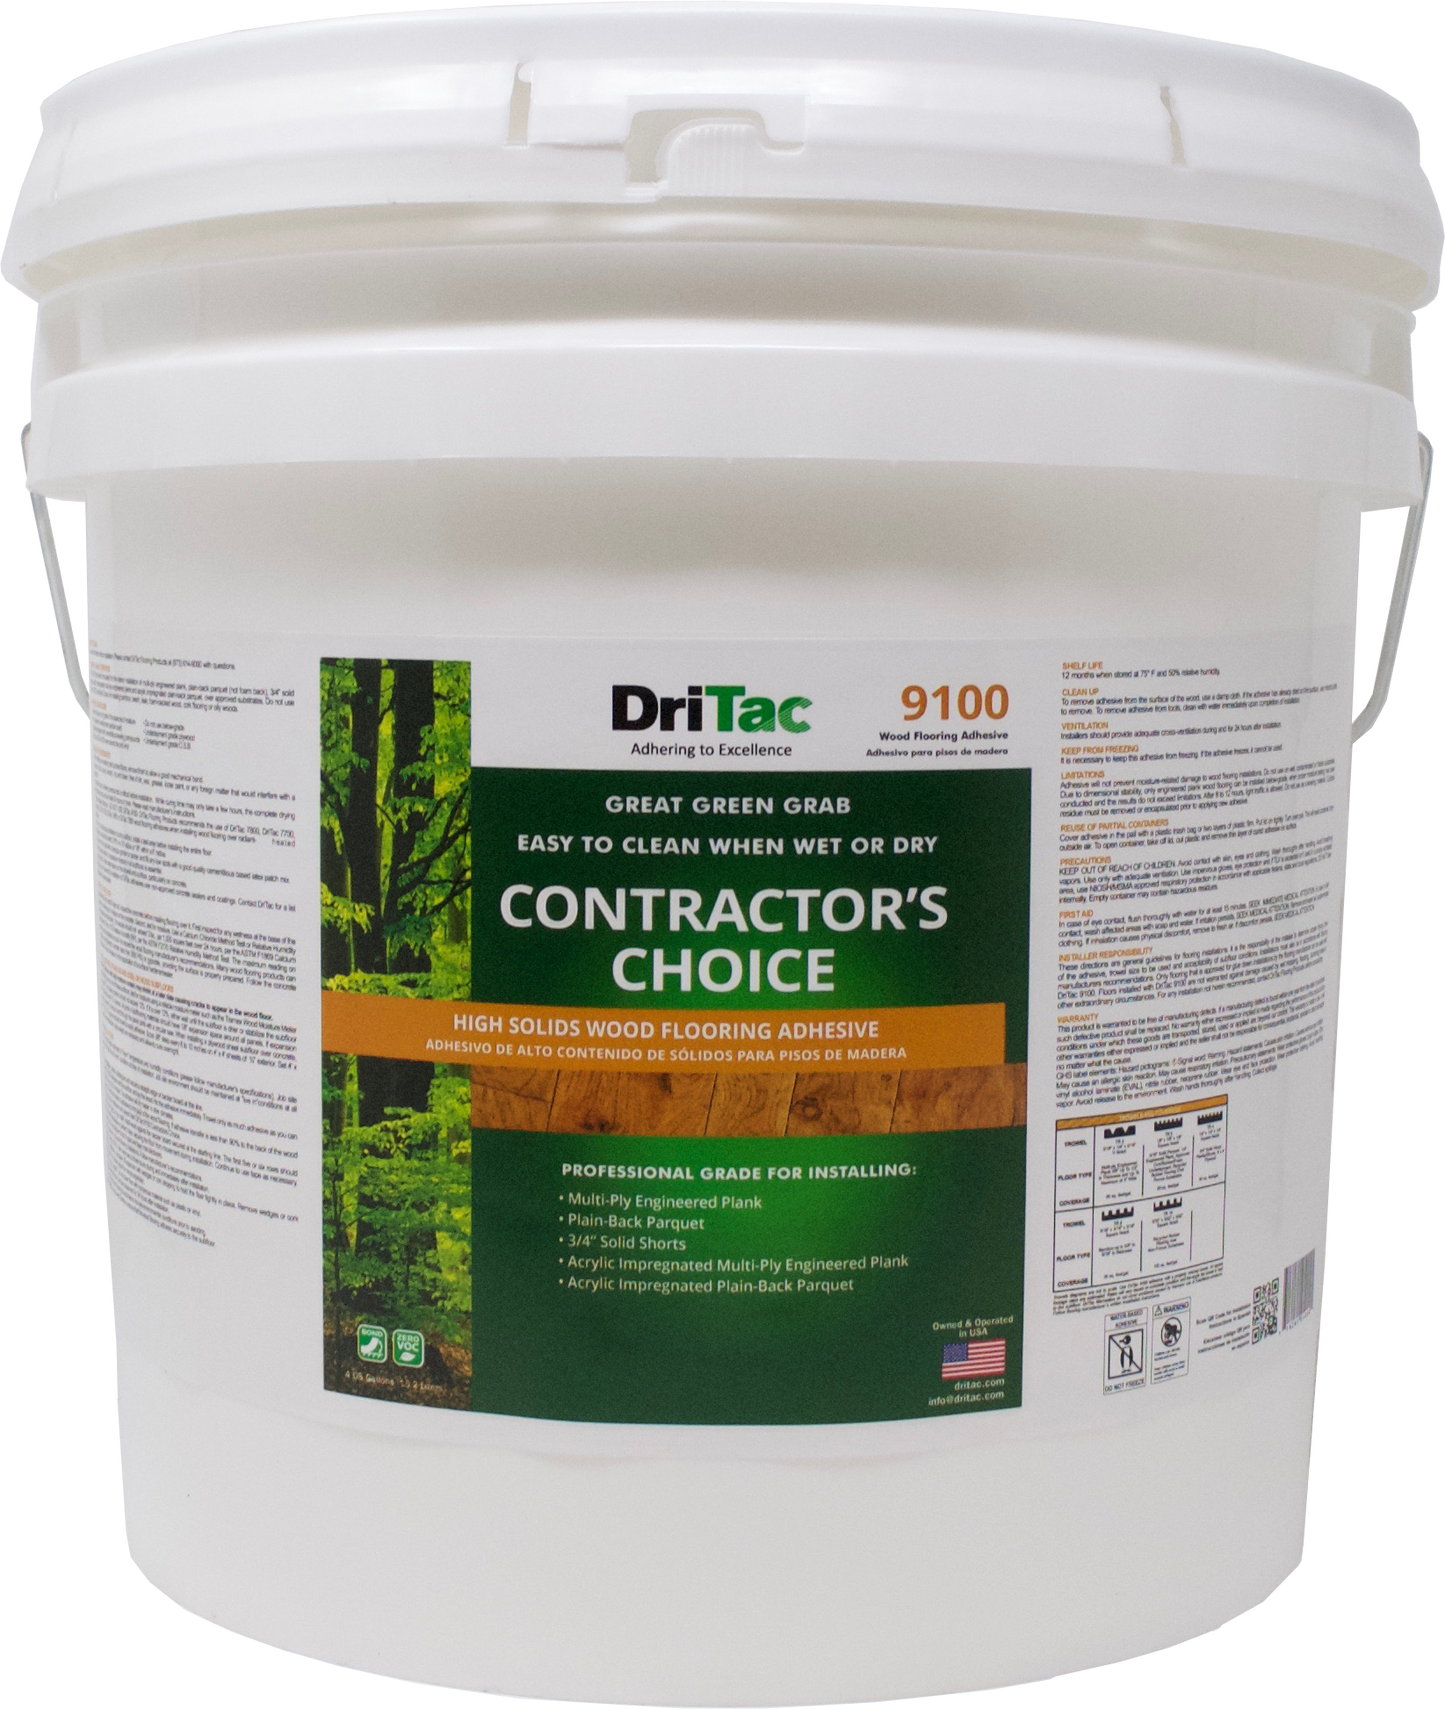 Dritac 9100 Contracotr's Choice 4Gal